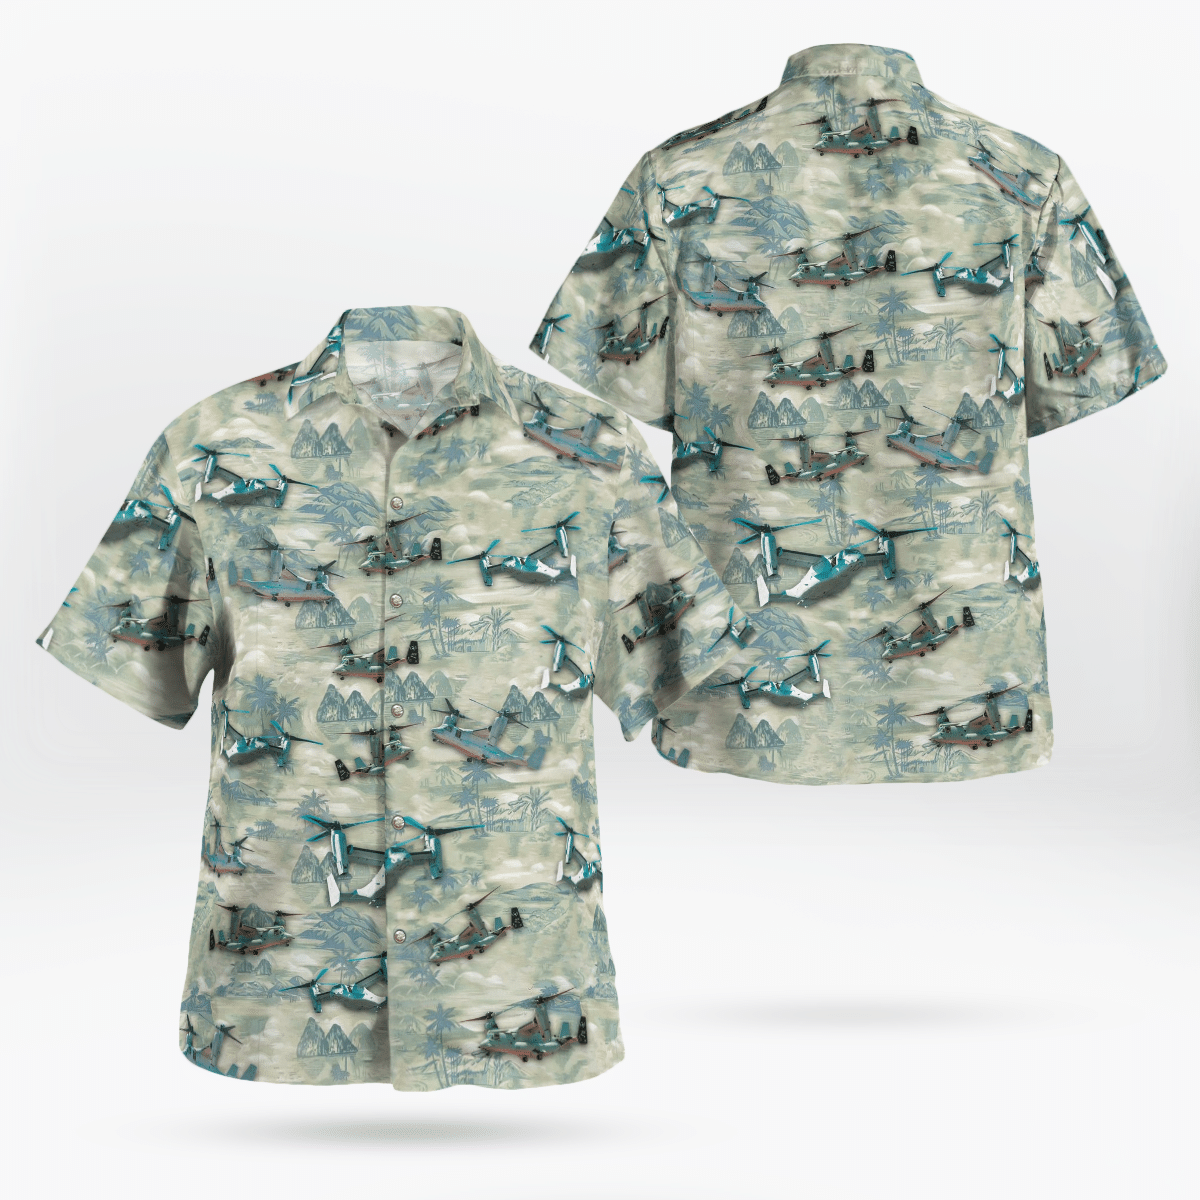 Consider getting these Hawaiian Shirt for your friends 421